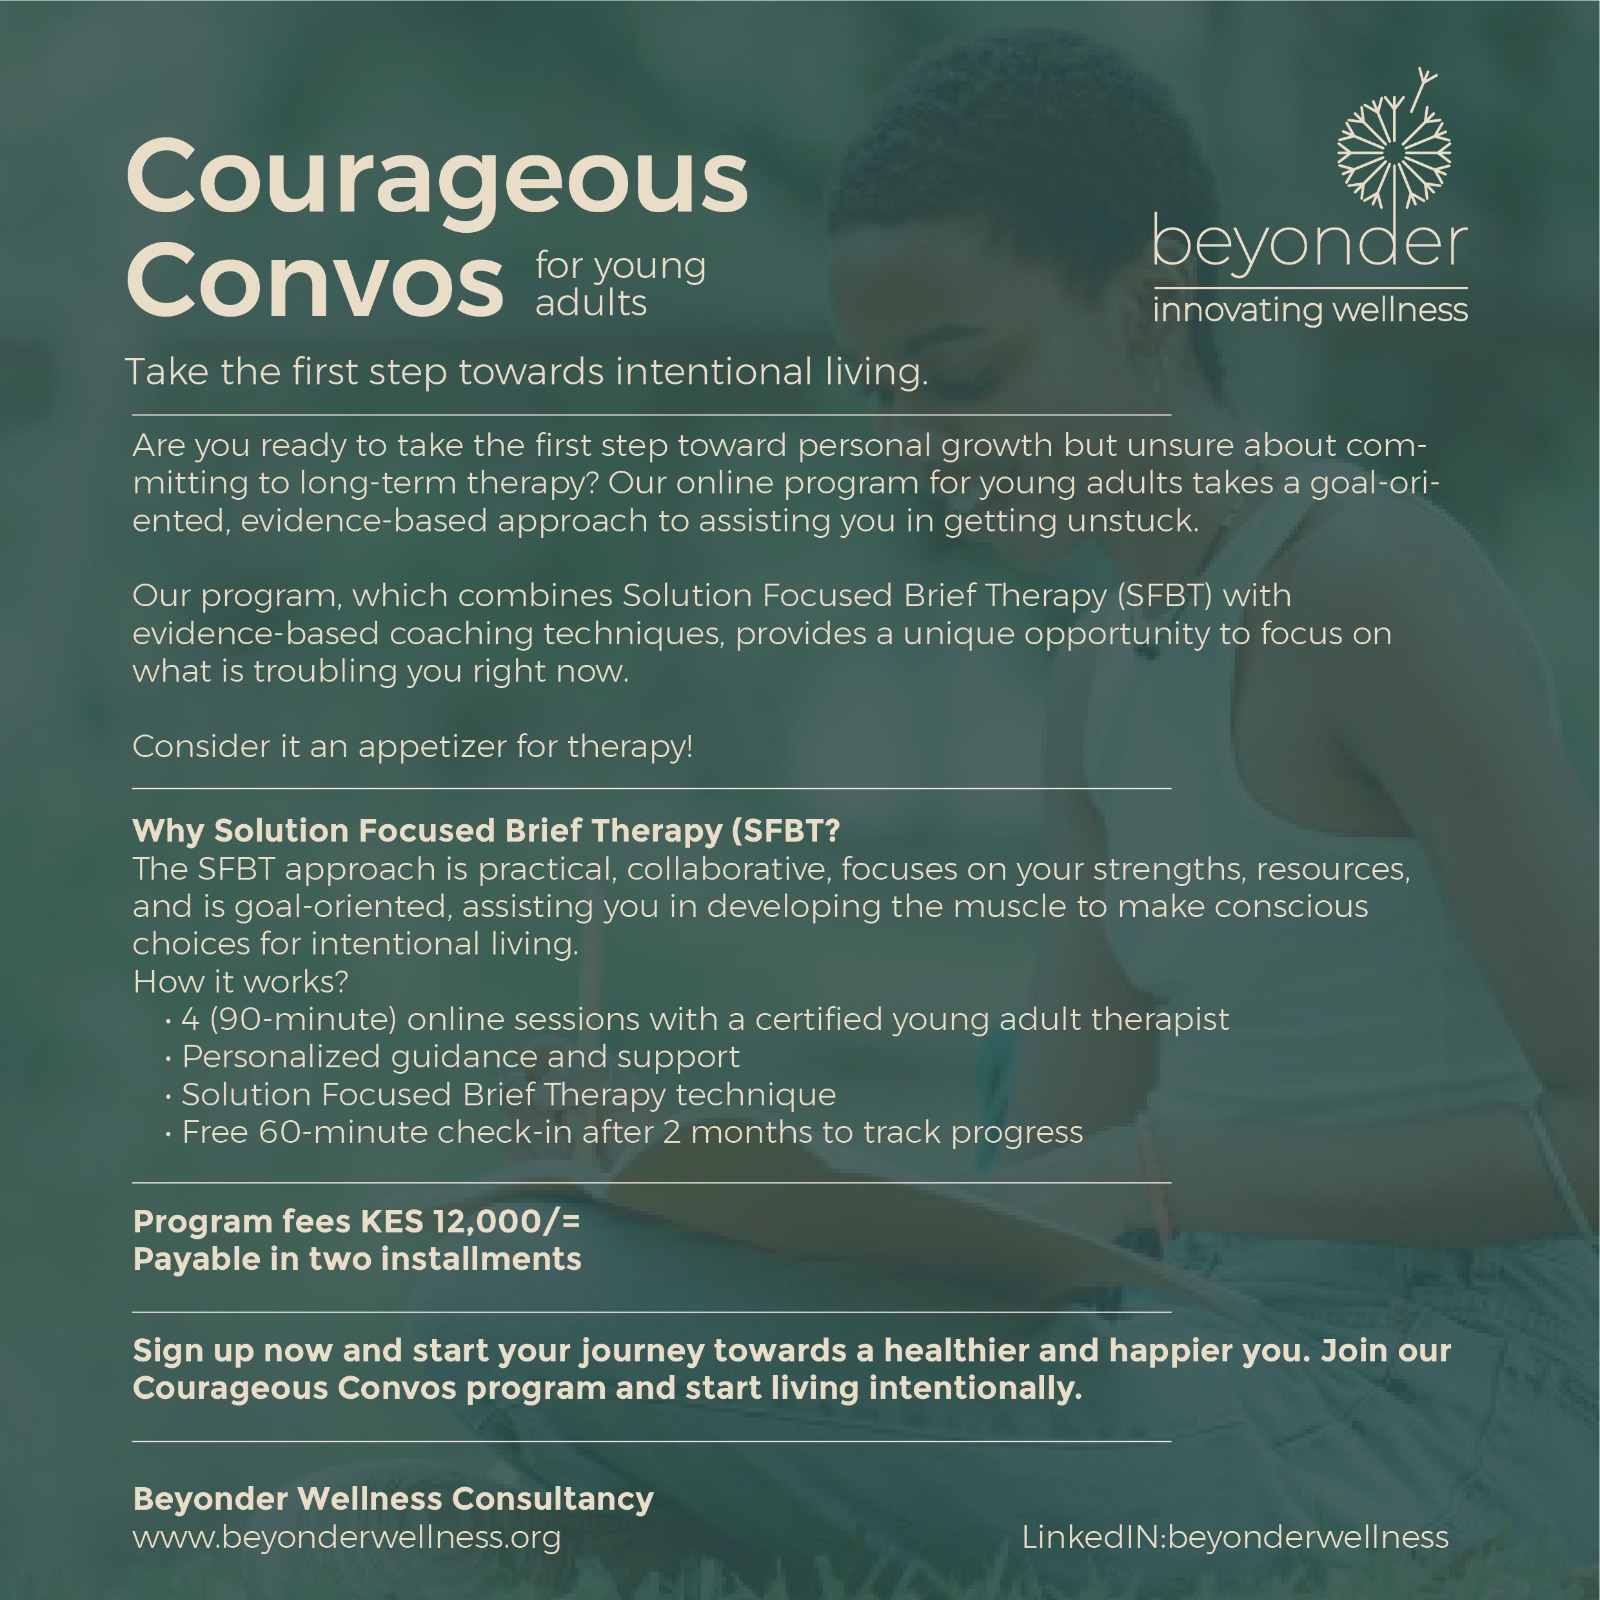 https://beyonderwellness.org/wp-content/uploads/2023/06/Courageous-convos-for-young-adults.jpeg